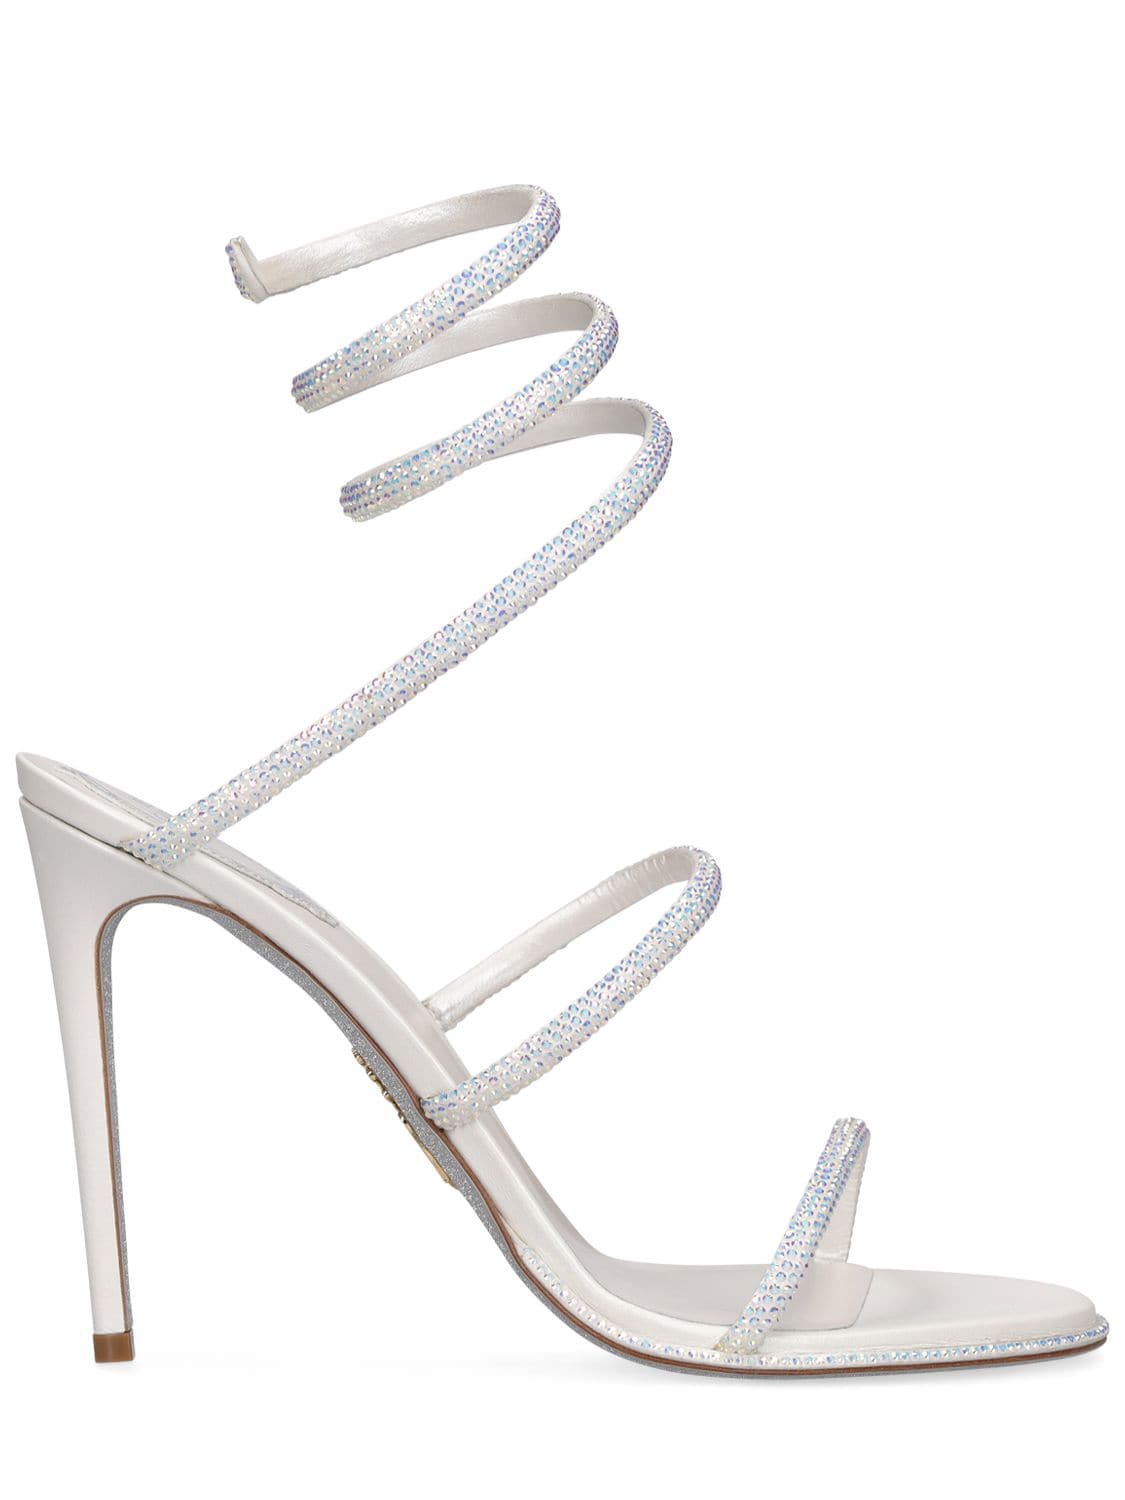 René Caovilla 105mm Embellished Leather Sandals In White